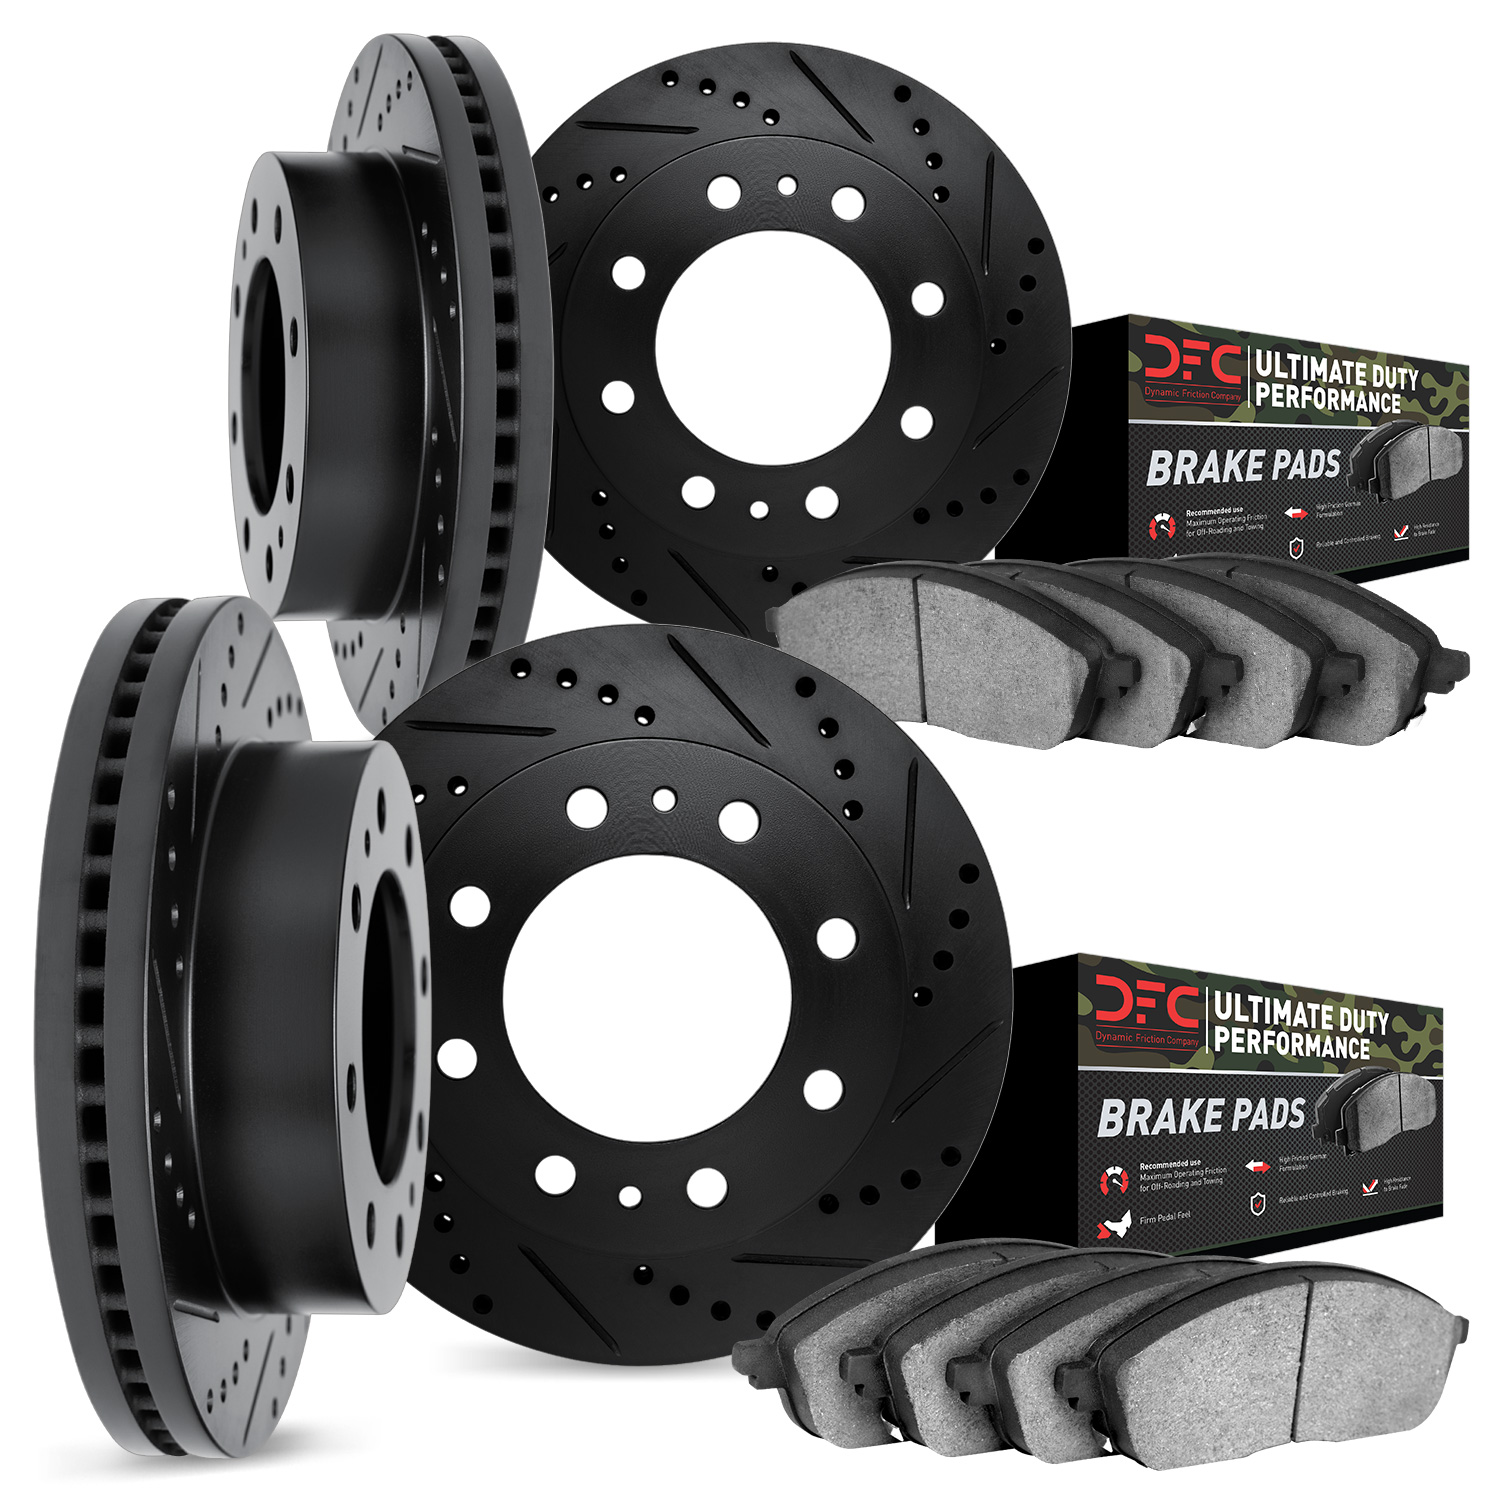 8404-46002 Drilled/Slotted Brake Rotors with Ultimate-Duty Brake Pads Kit [Black], 2000-2005 GM, Position: Front and Rear